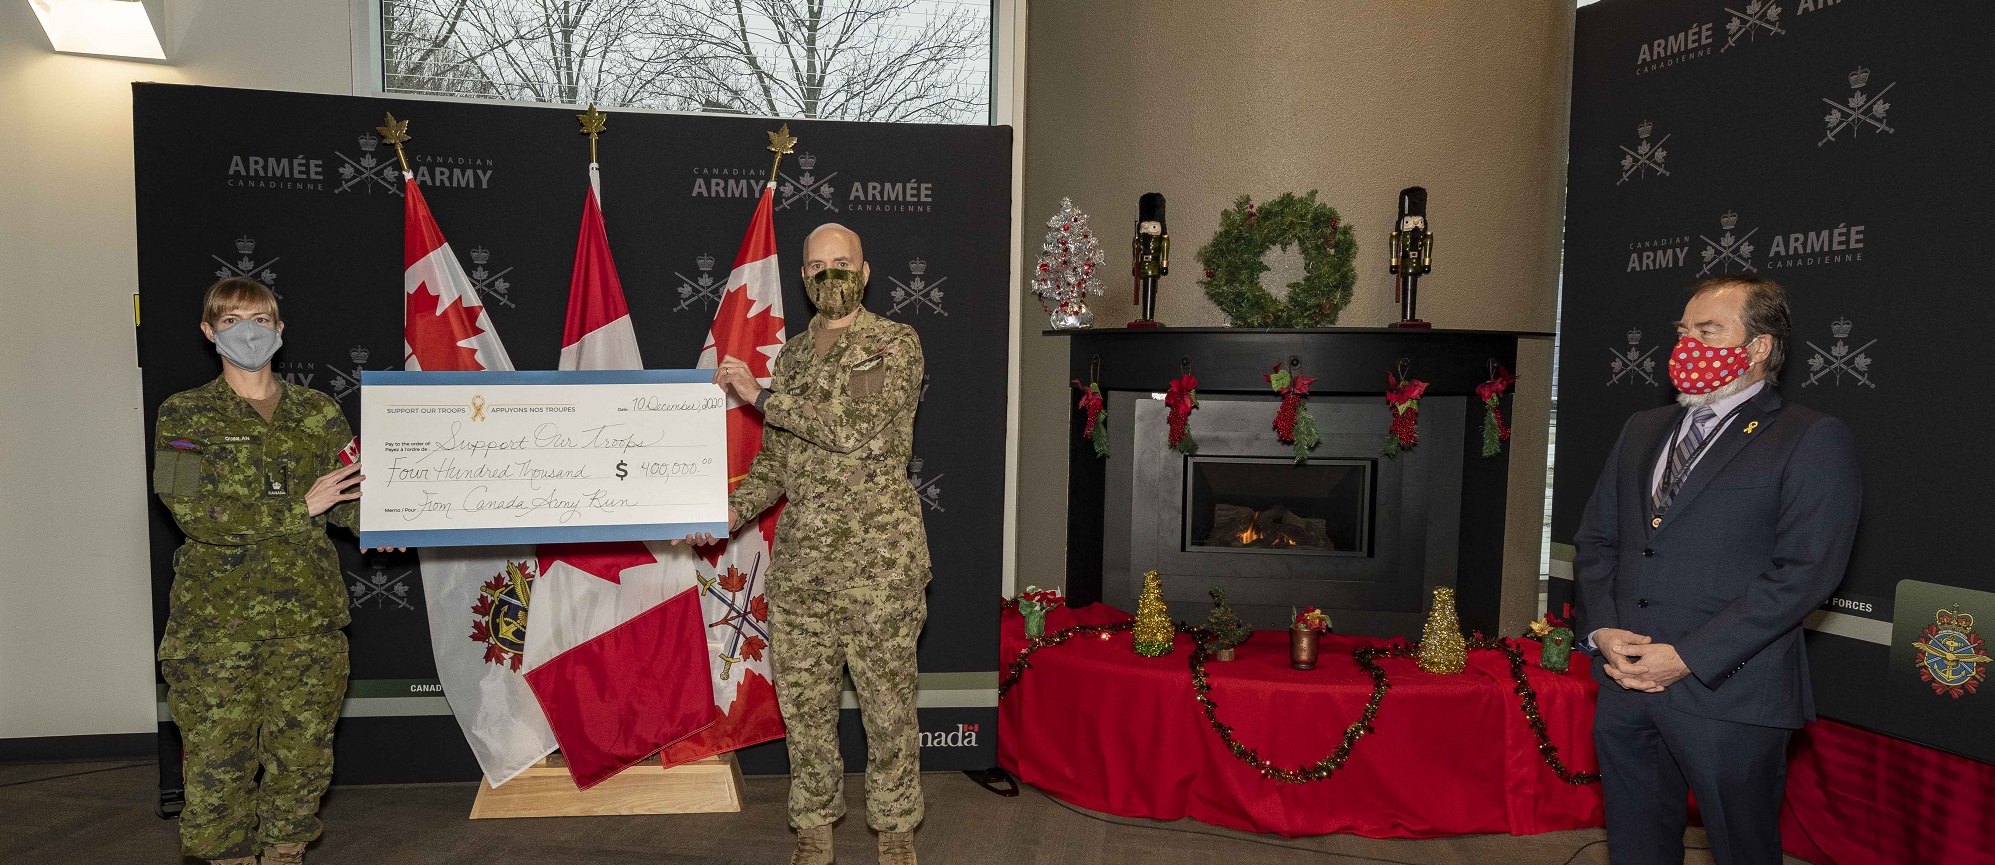 Canada Army Run Raises $4 million for Support Our Troops Since 2009 After Latest Virtual Series Image